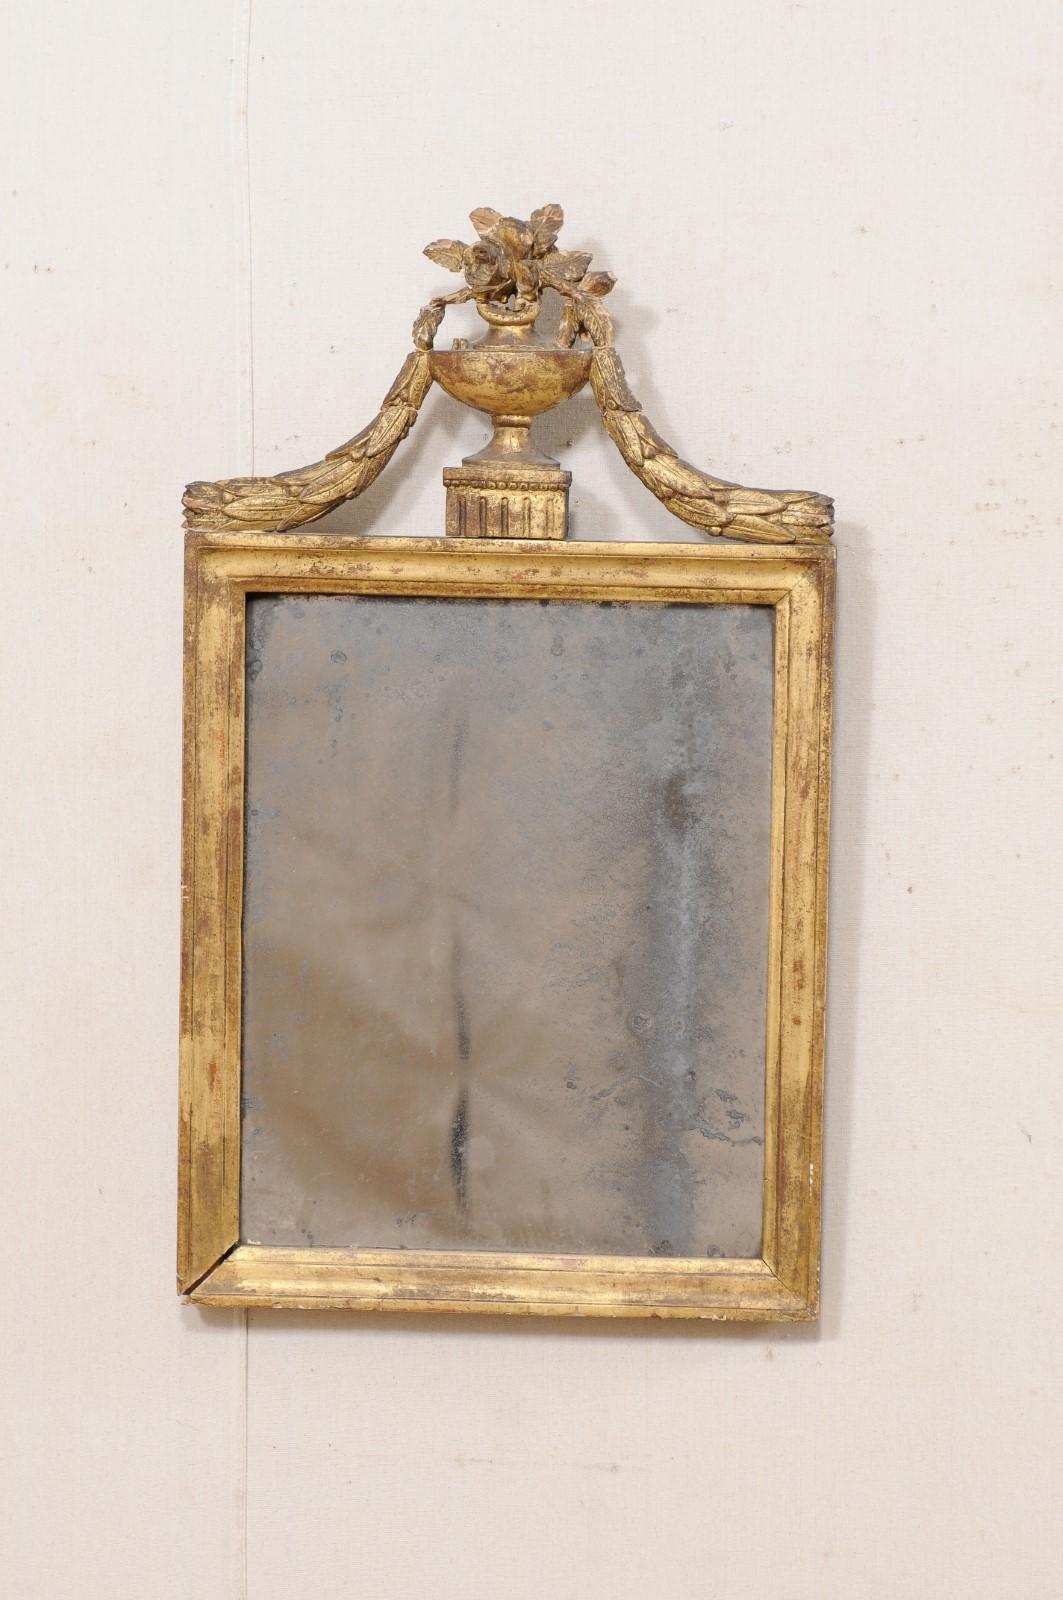 A French Neoclassical mirror from the turn of the 18th and 19th century. This antique mirror from France has a rectangular-shaped mirror within a carved gilt wood surround, and in typical Neoclassical style, has a carved and raised urn crest atop of